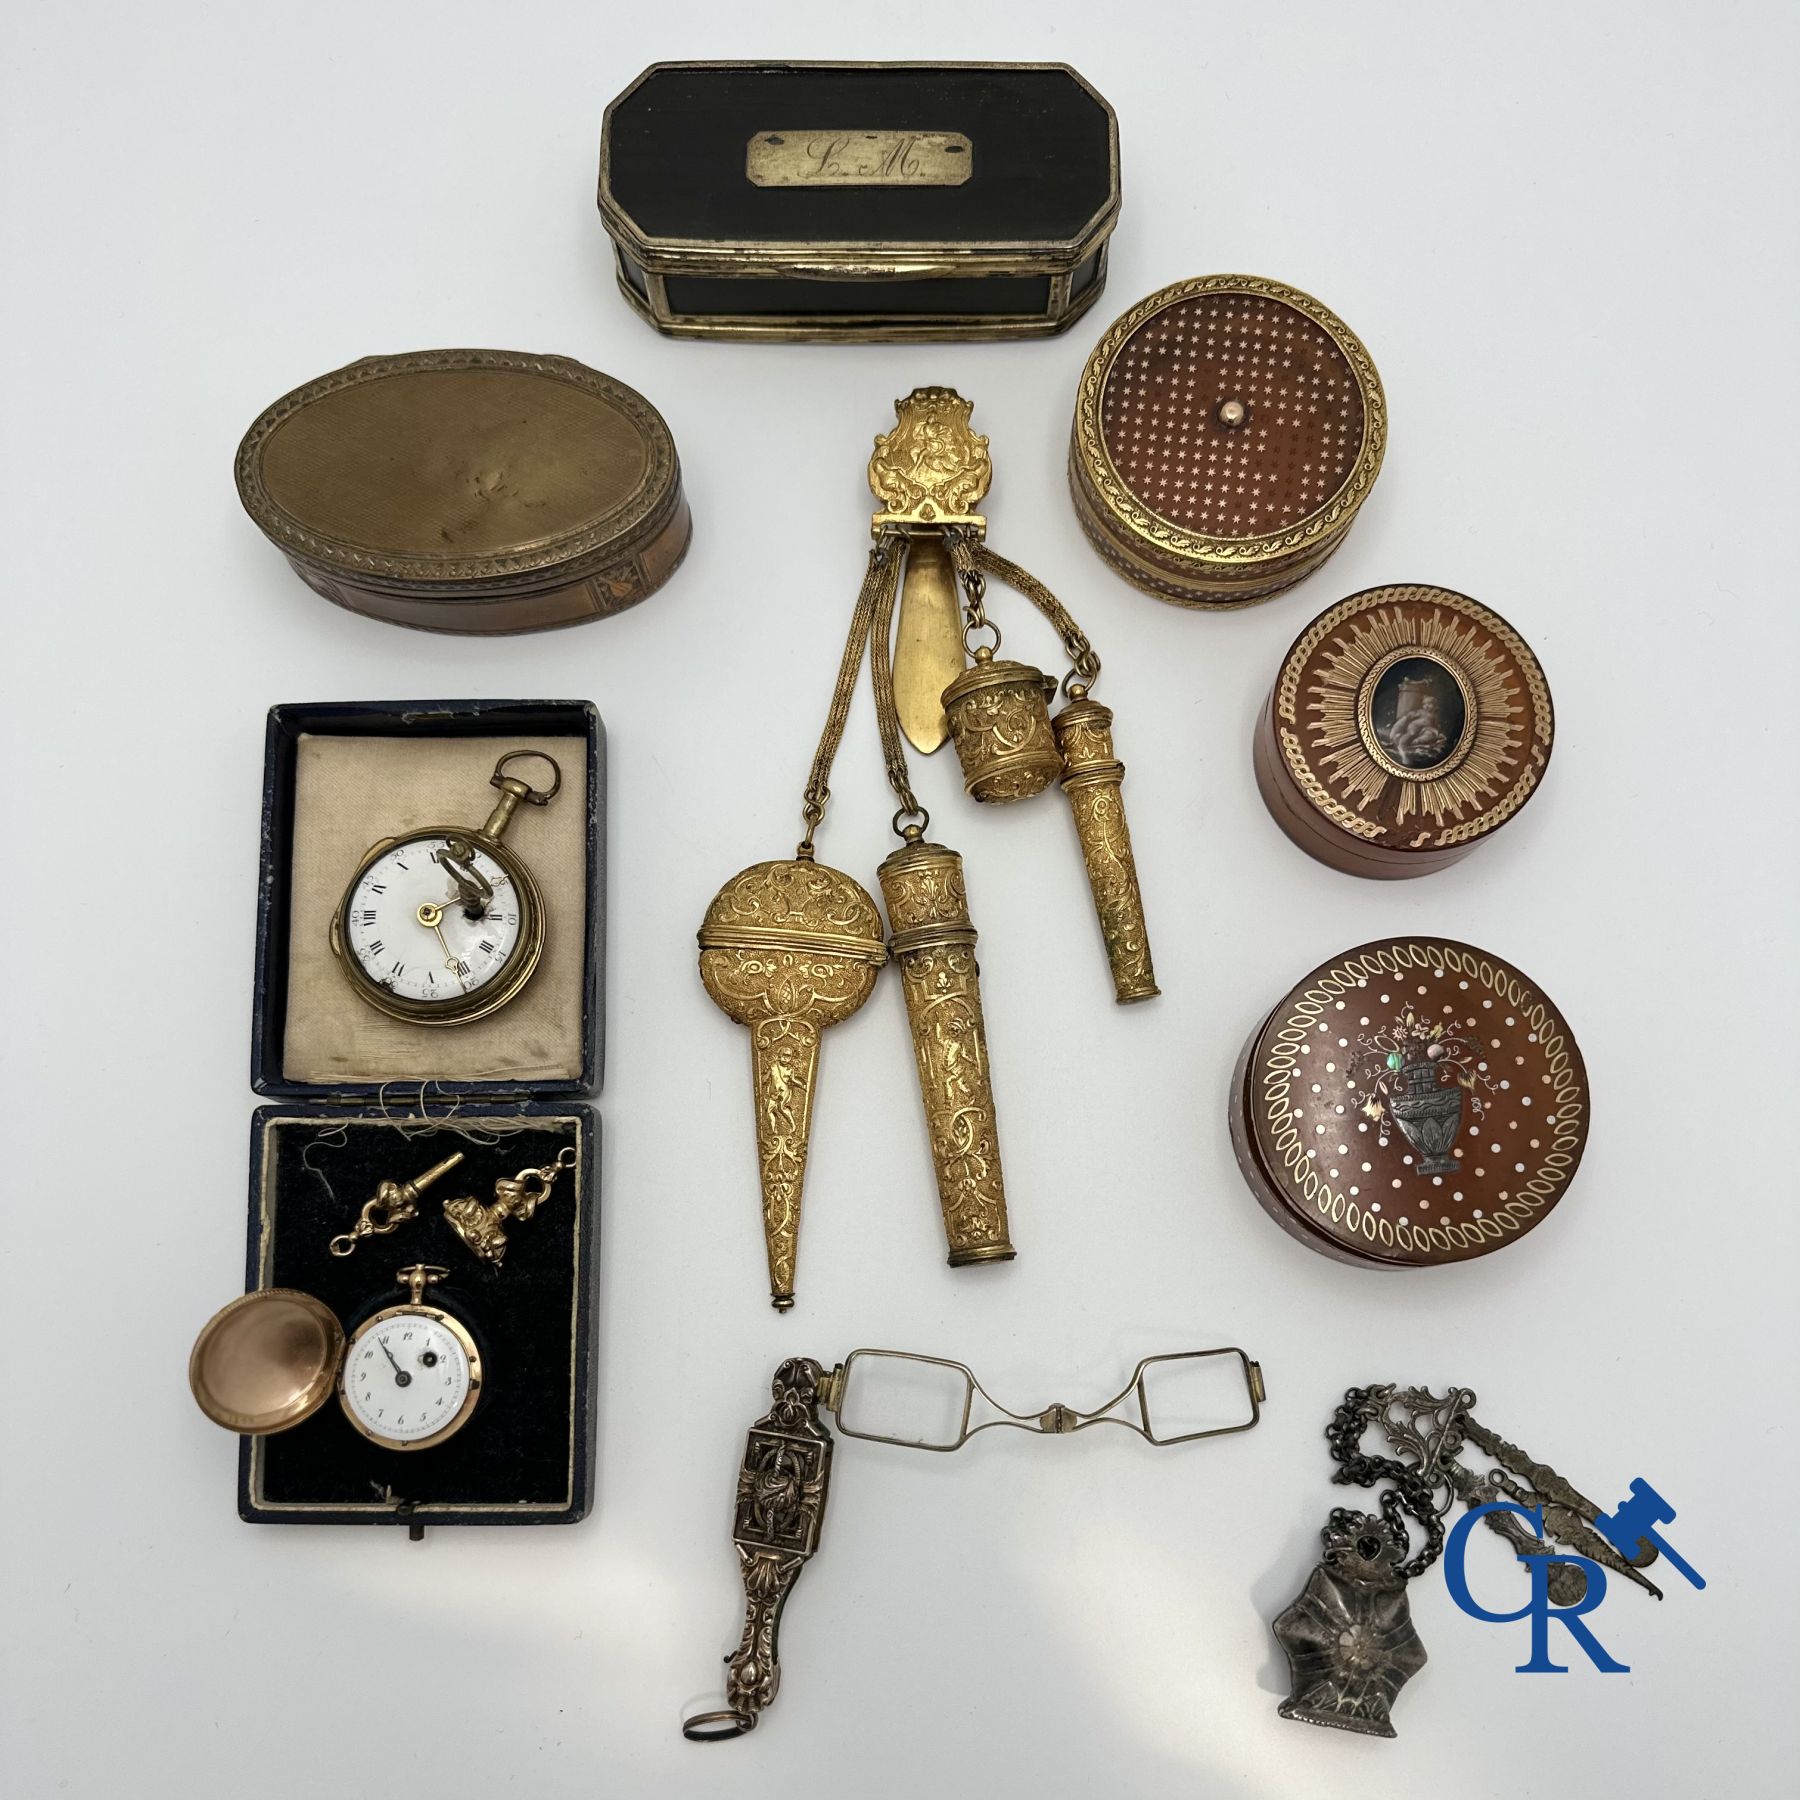 Jewellery-Watches: Important lot consisting of several 18th and 19th century objects in gold, silver and metal.